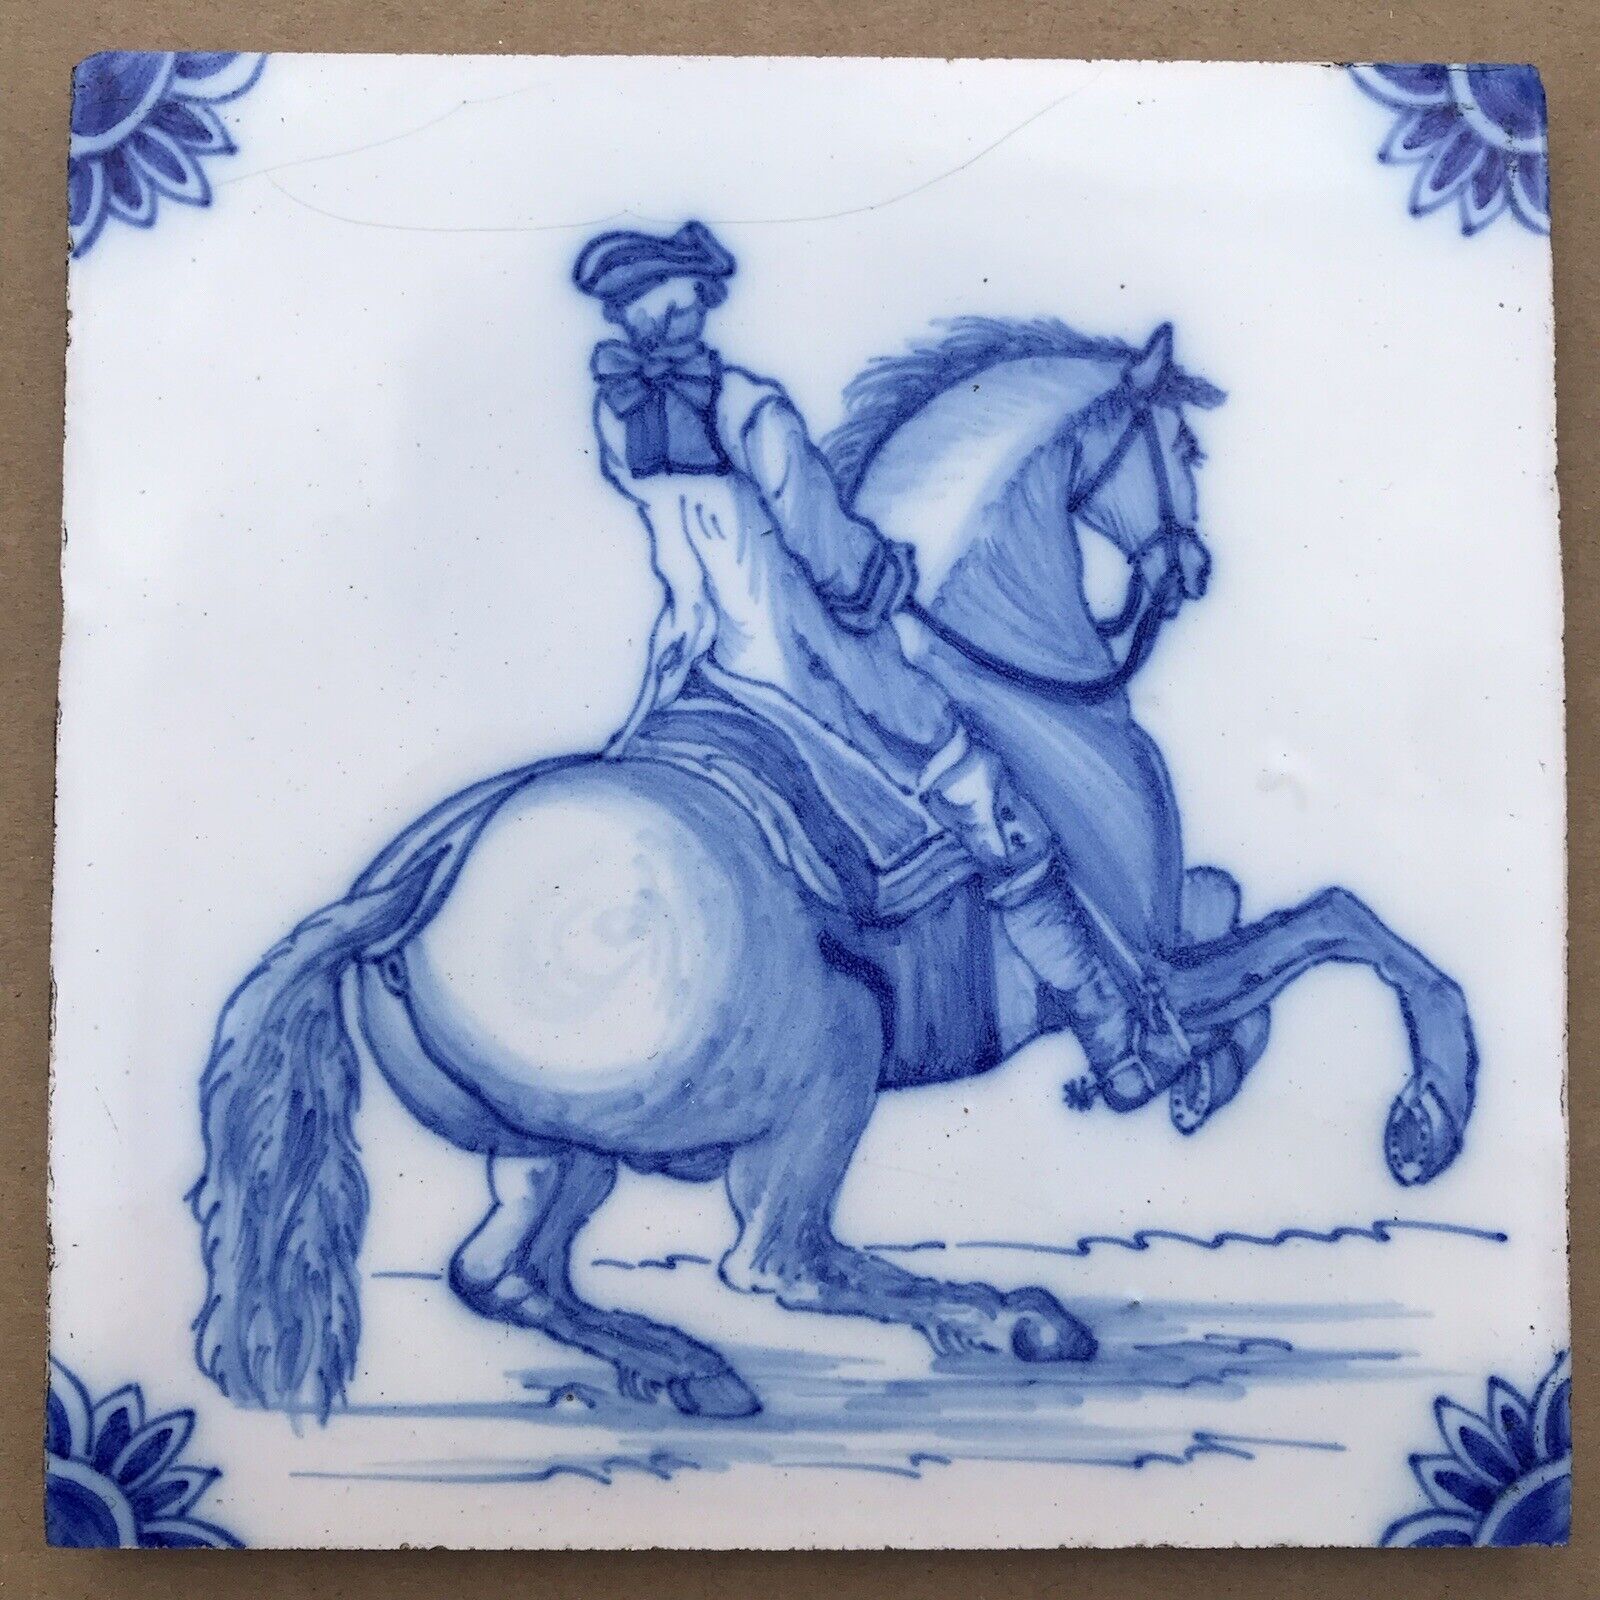 Antique delft tile depicting horserider cavalier possibly C17/18th